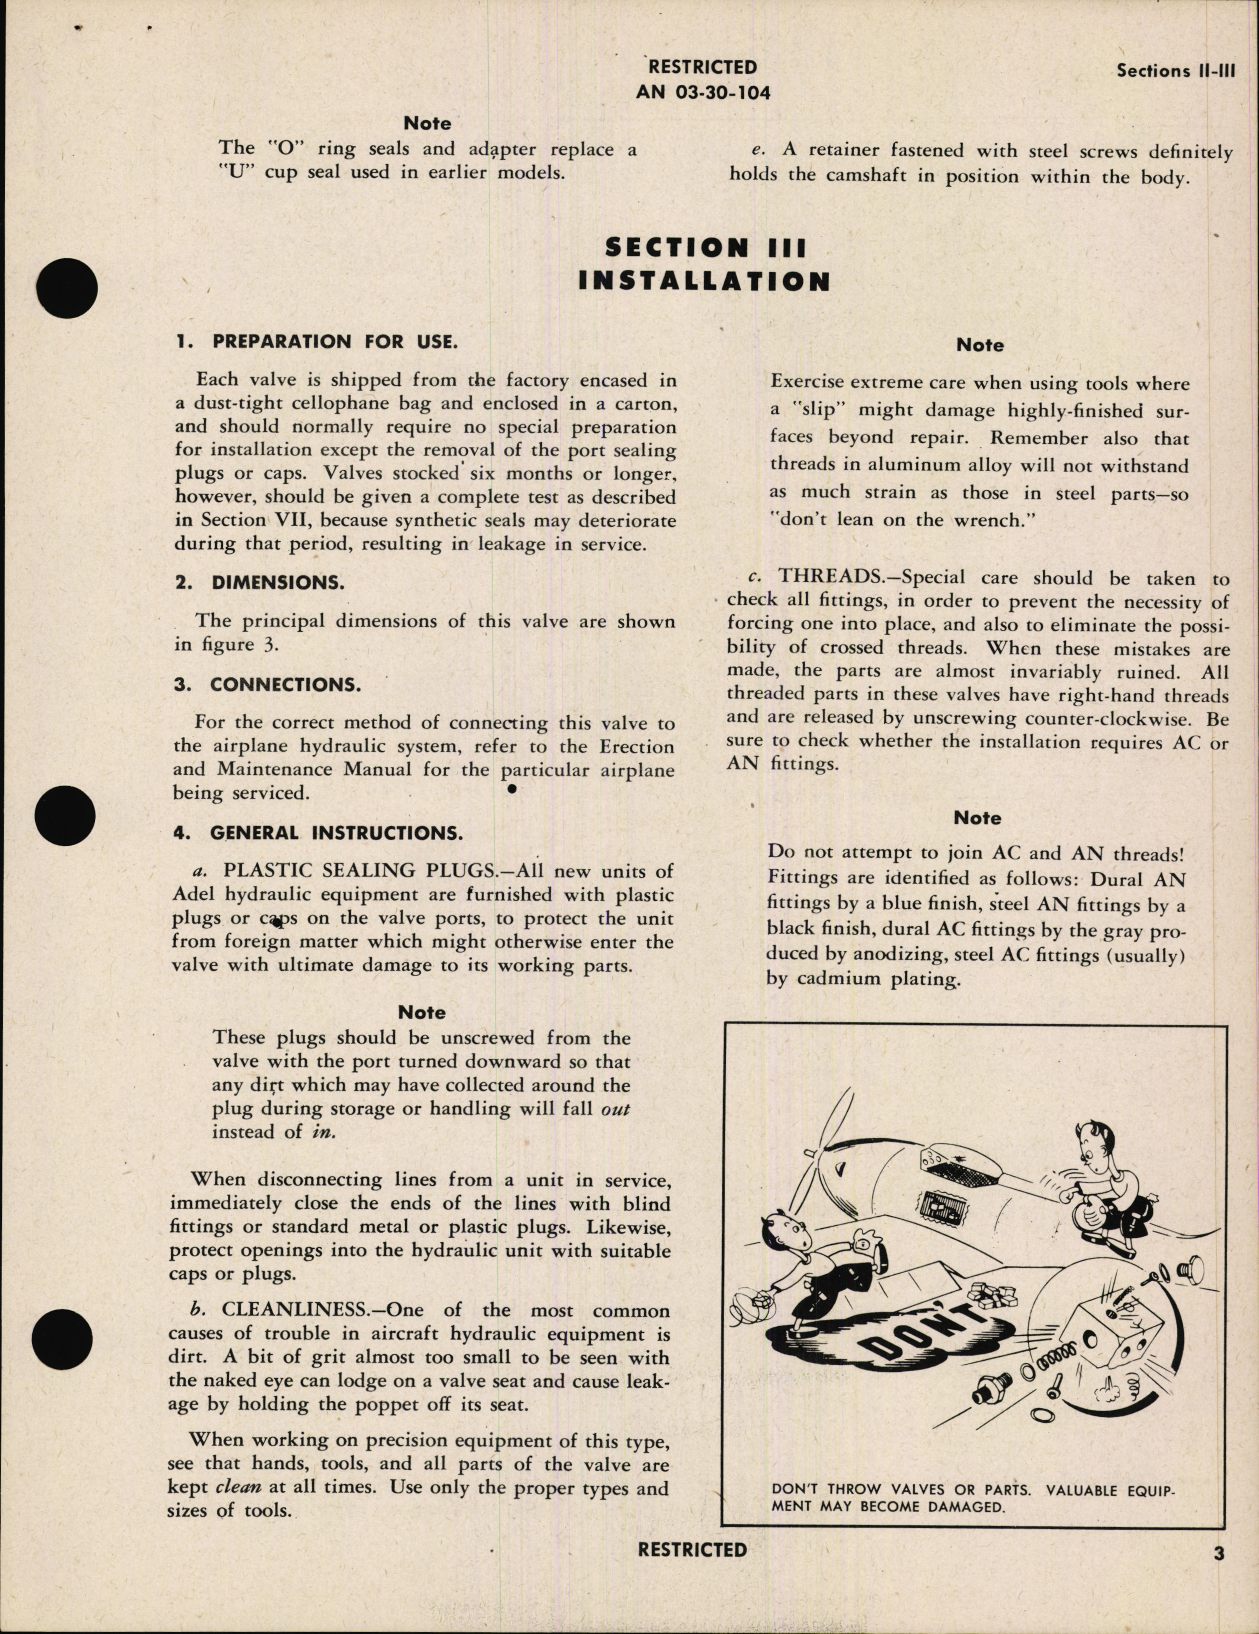 Sample page 7 from AirCorps Library document: Handbook of Instructions with Parts Catalog for Steel Seat Hydraulic Selector Valve Model 9578